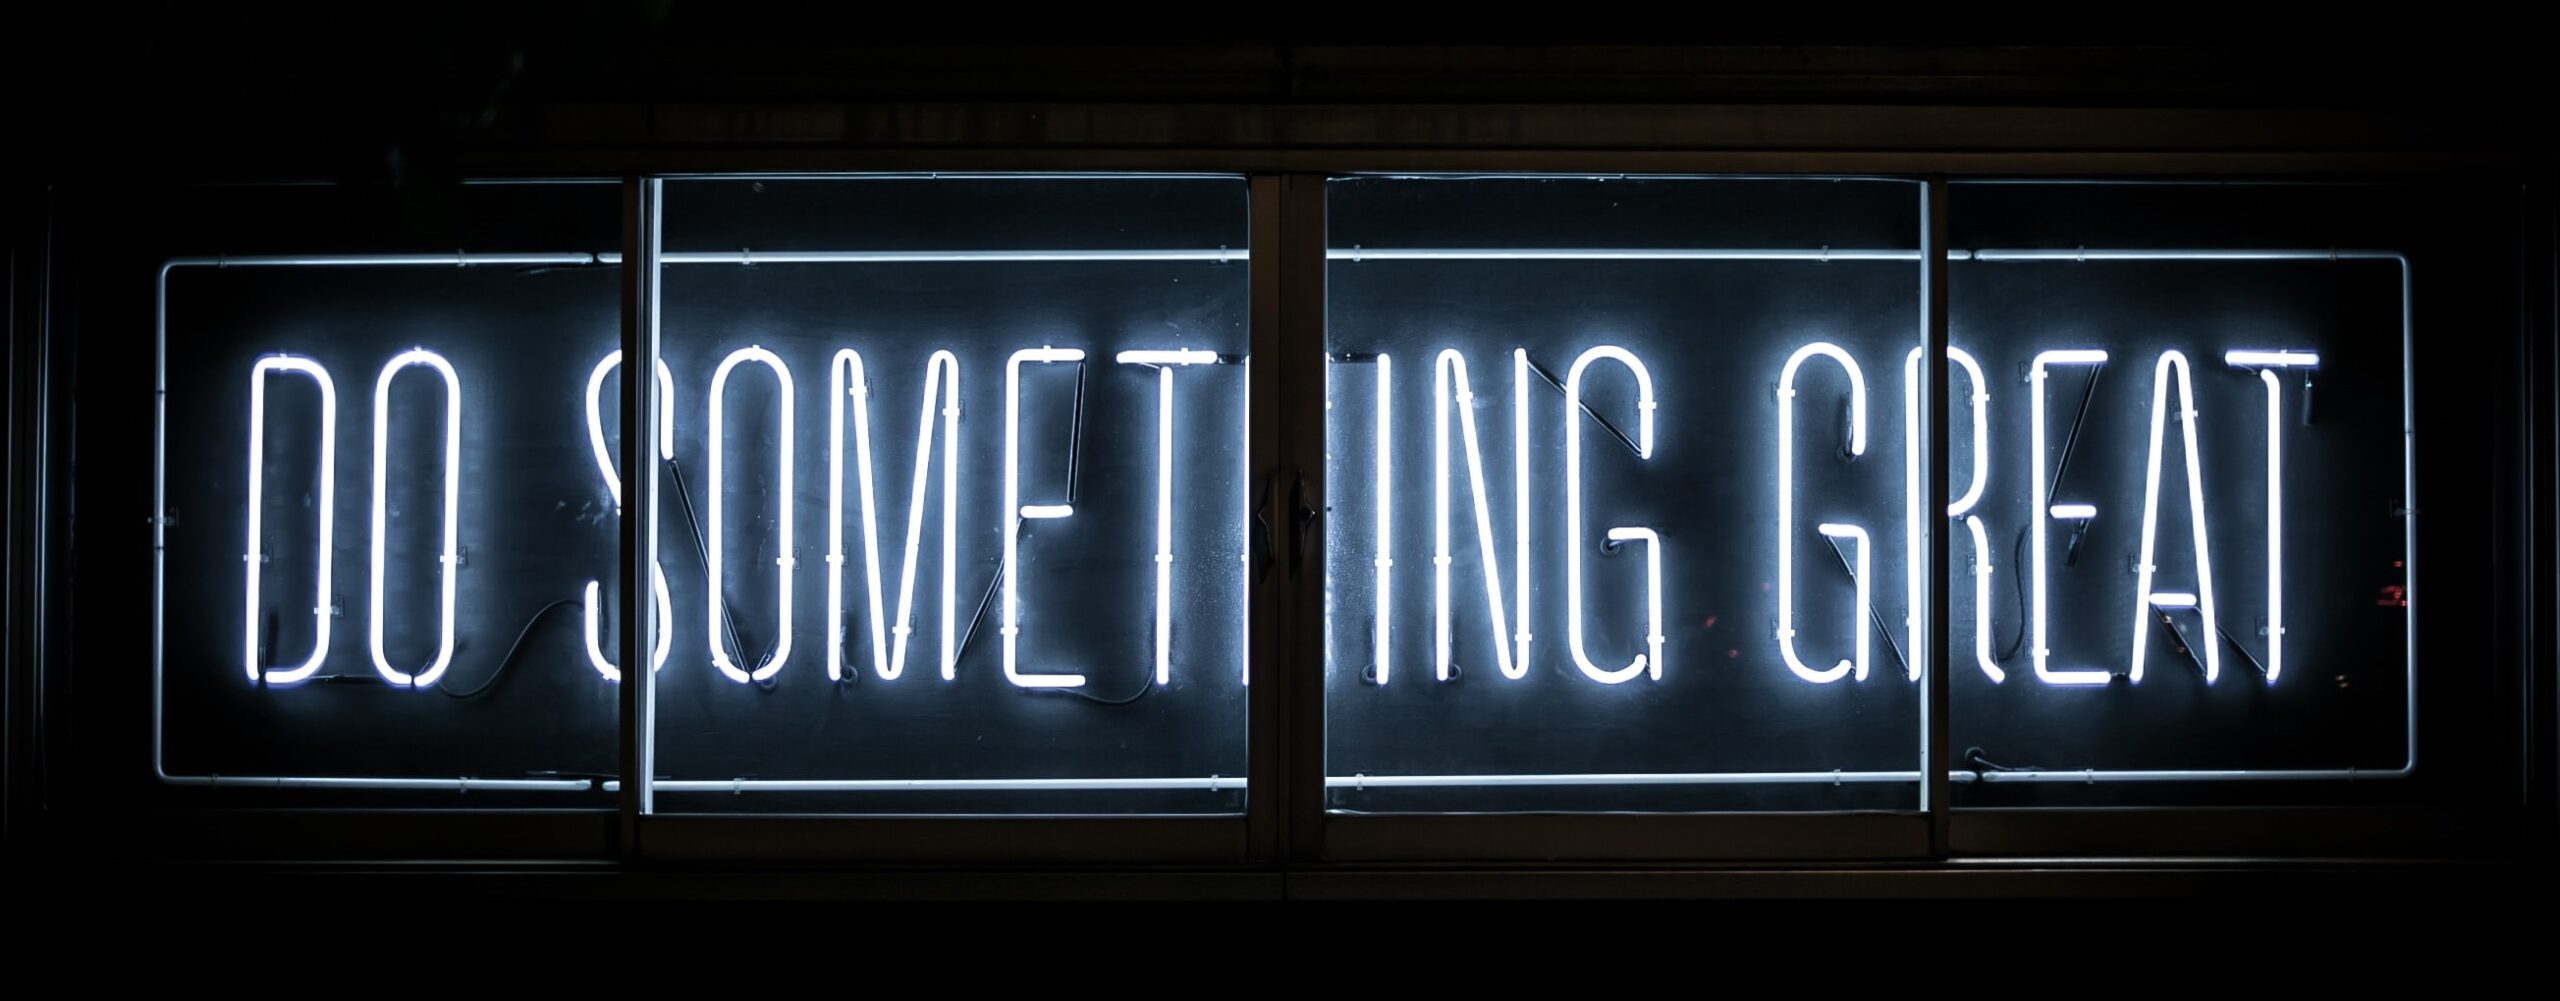 A blue neon sign reading "do something great".